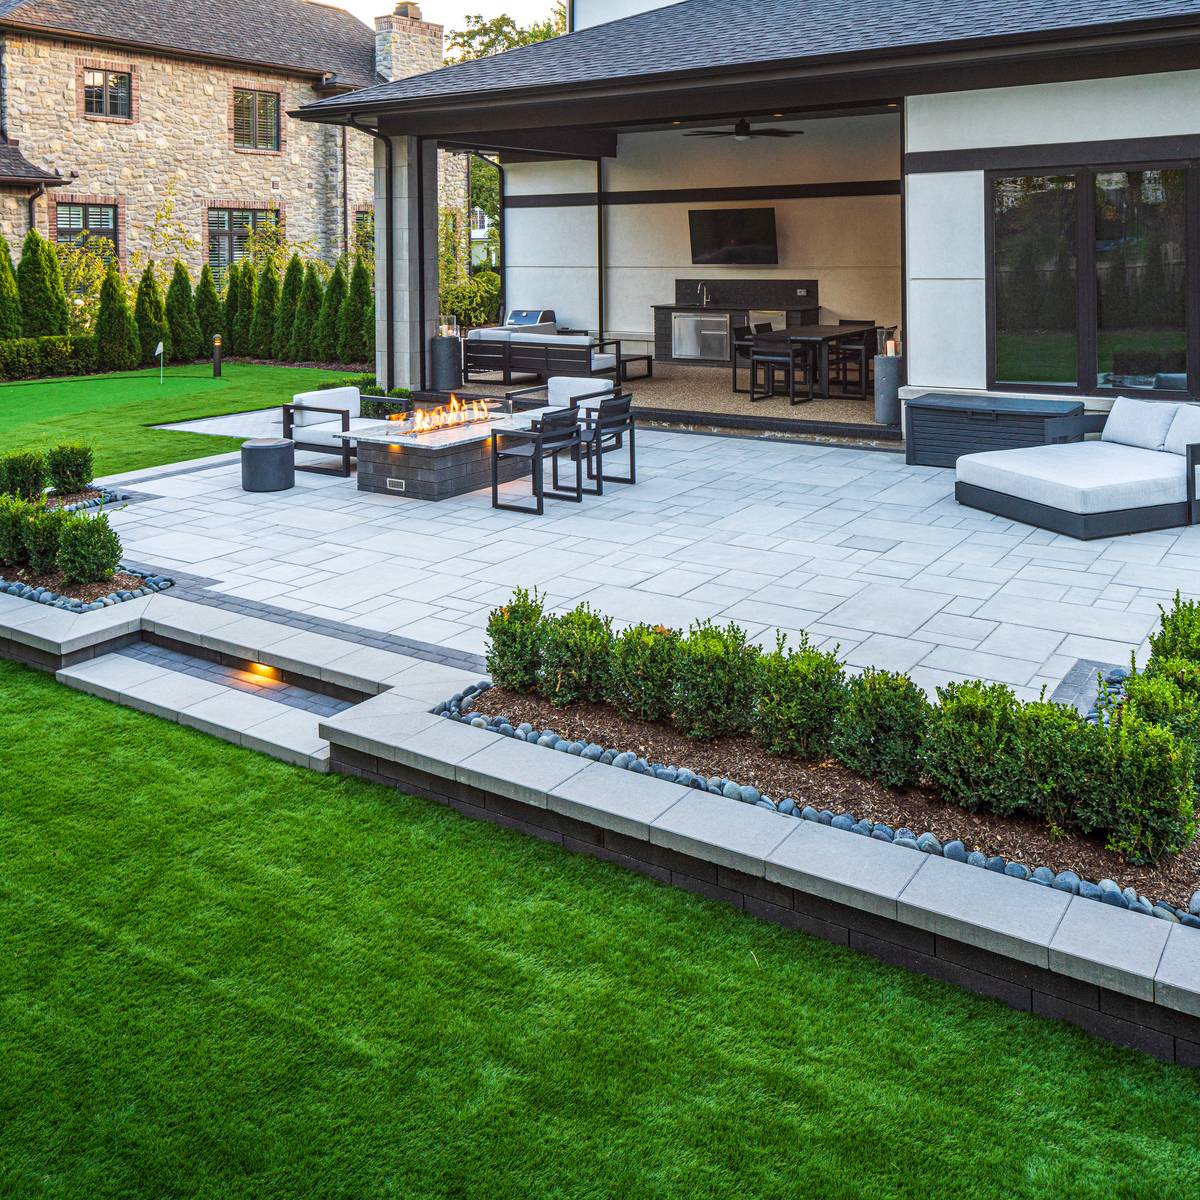 A backyard with grass and concrete pavers surrounding a fire pit.